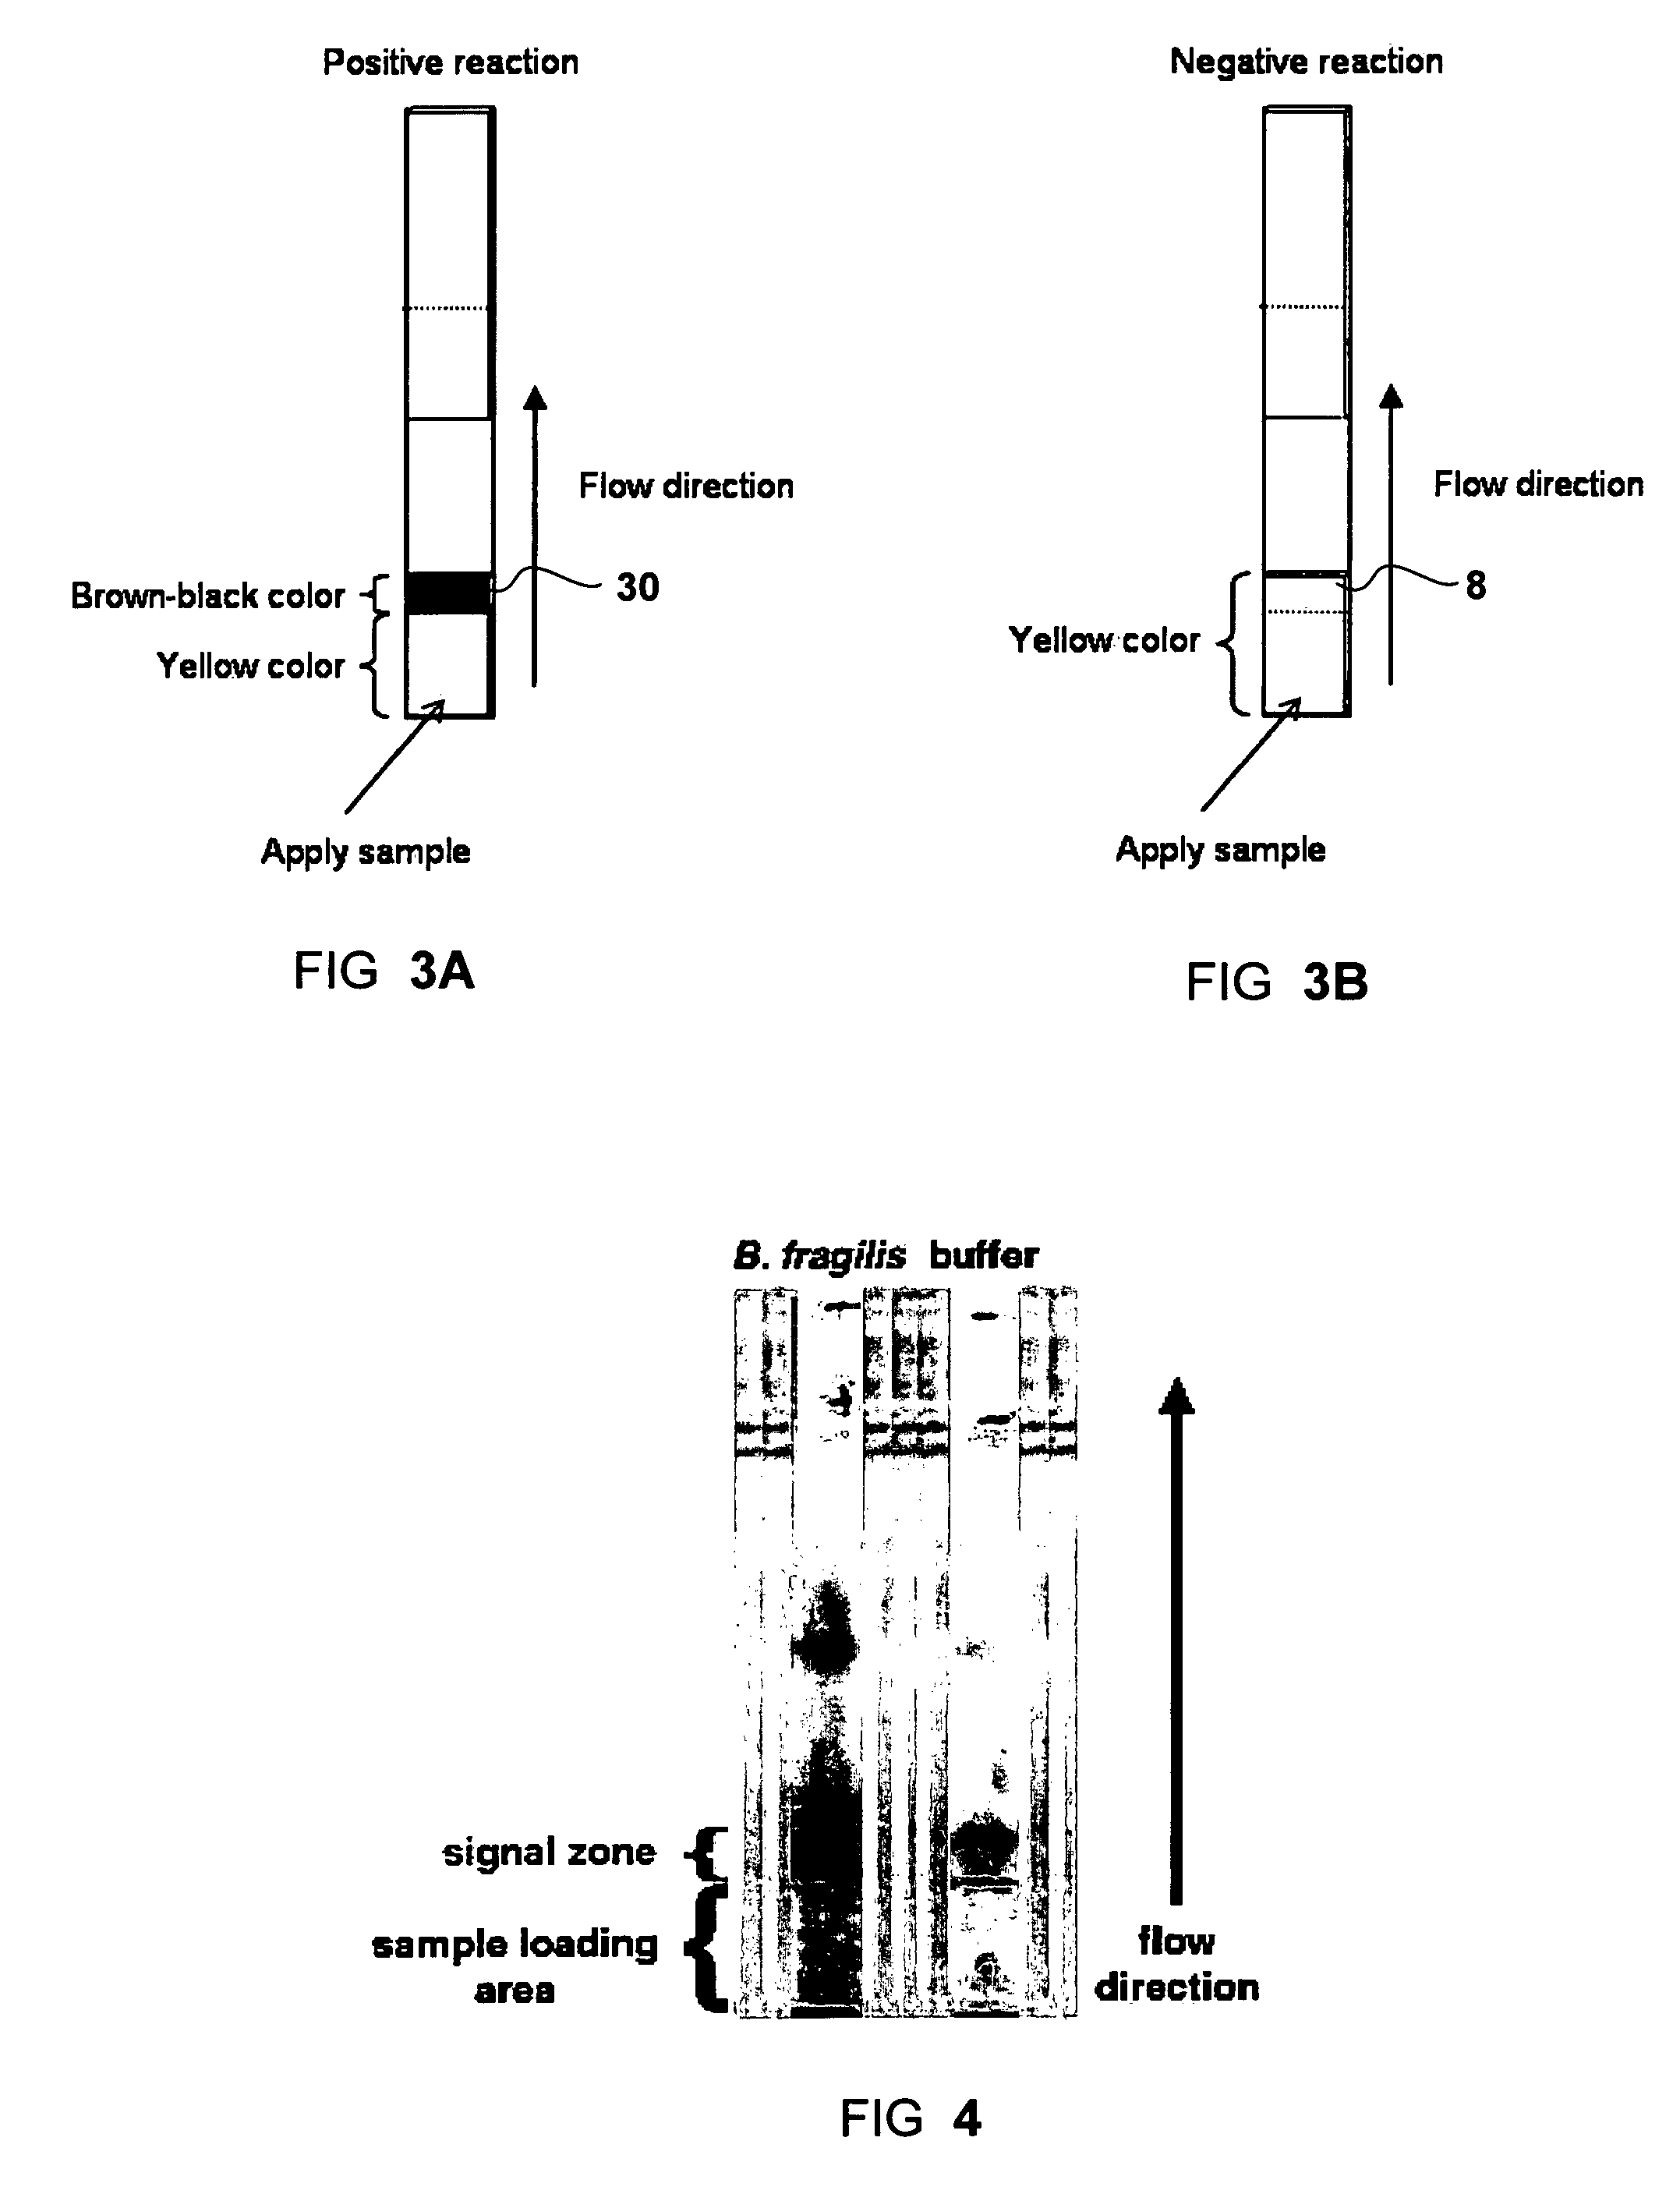 Solid phase test device for sialidase assay